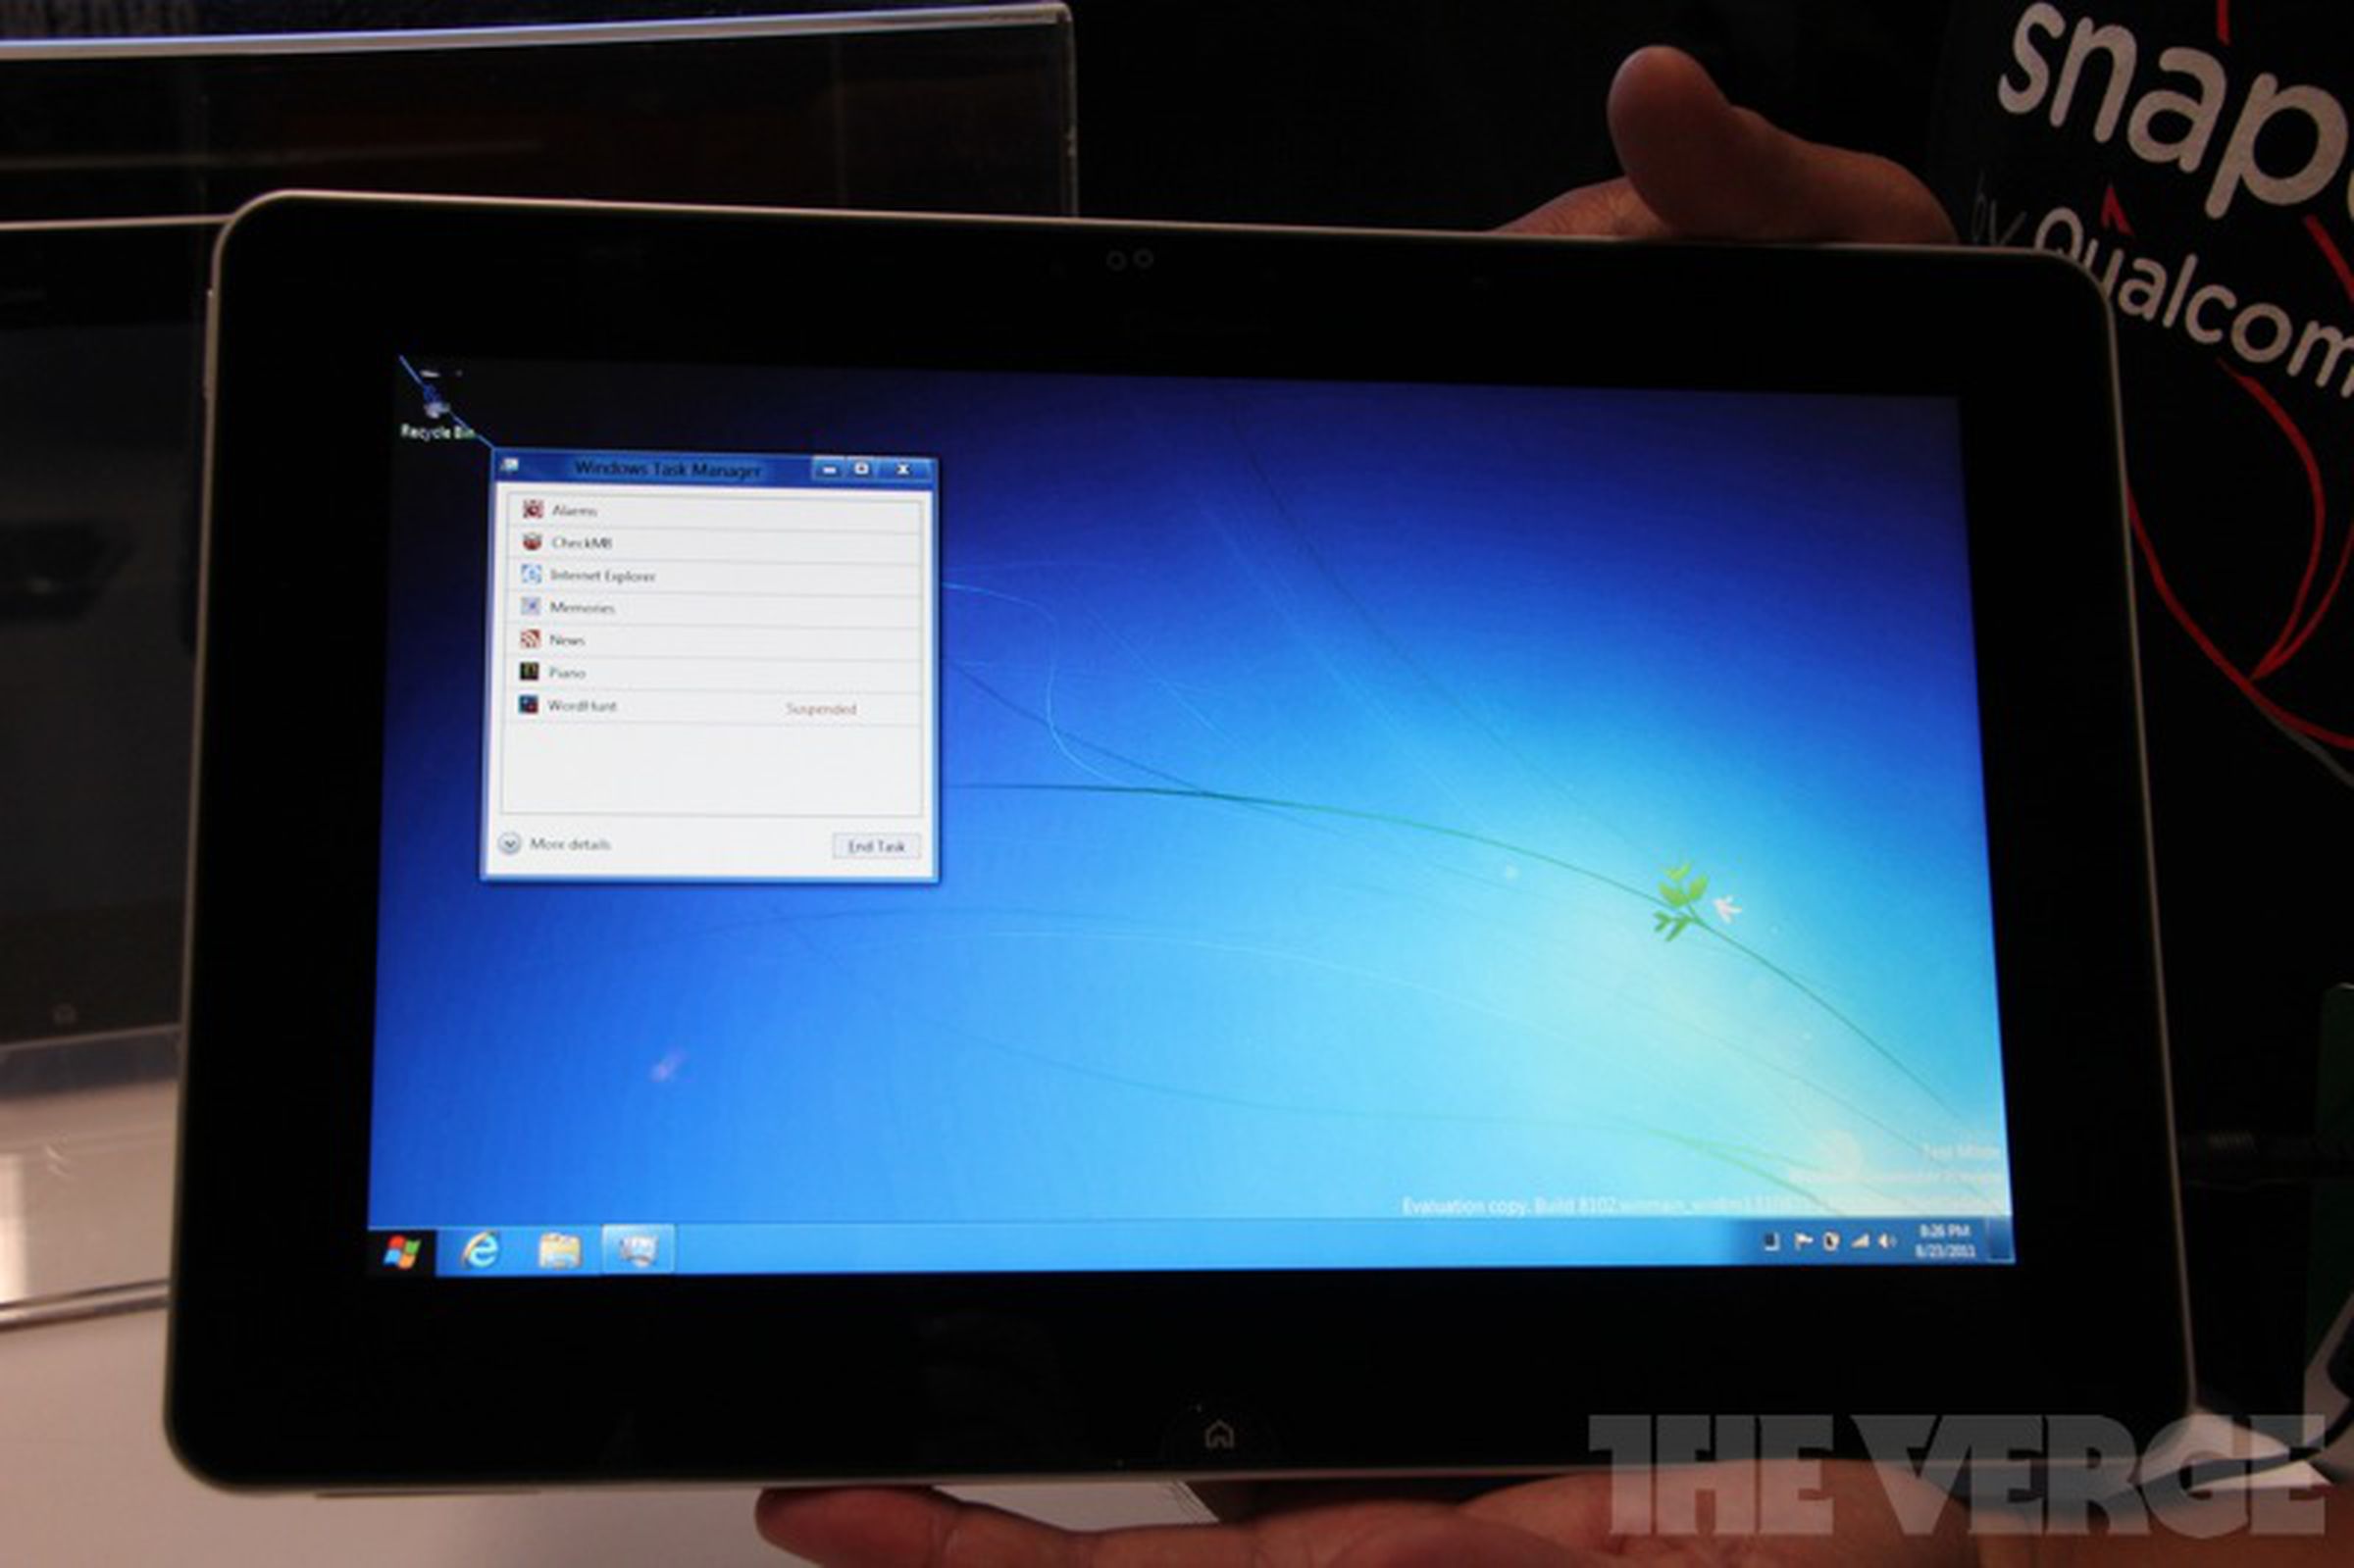 Qualcomm Windows 8 reference design tablet hands-on photos